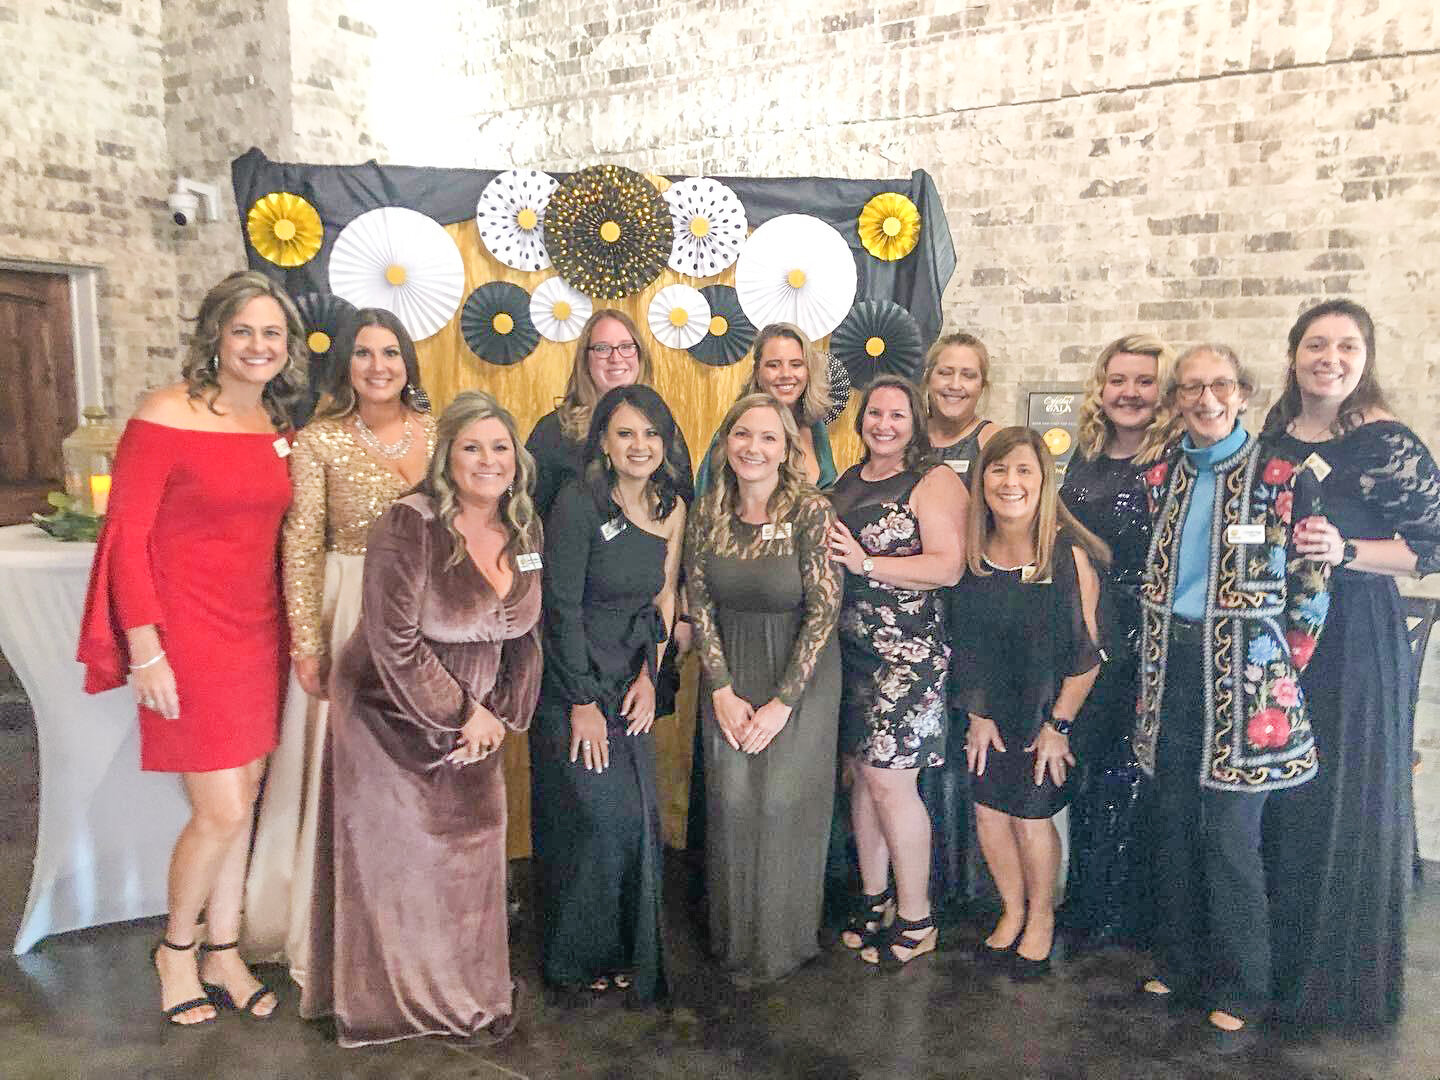 Staff members of the Paluxy River Children’s Advocacy Center get ready to welcome guests during last year’s winter gala event at La Bella Luna.